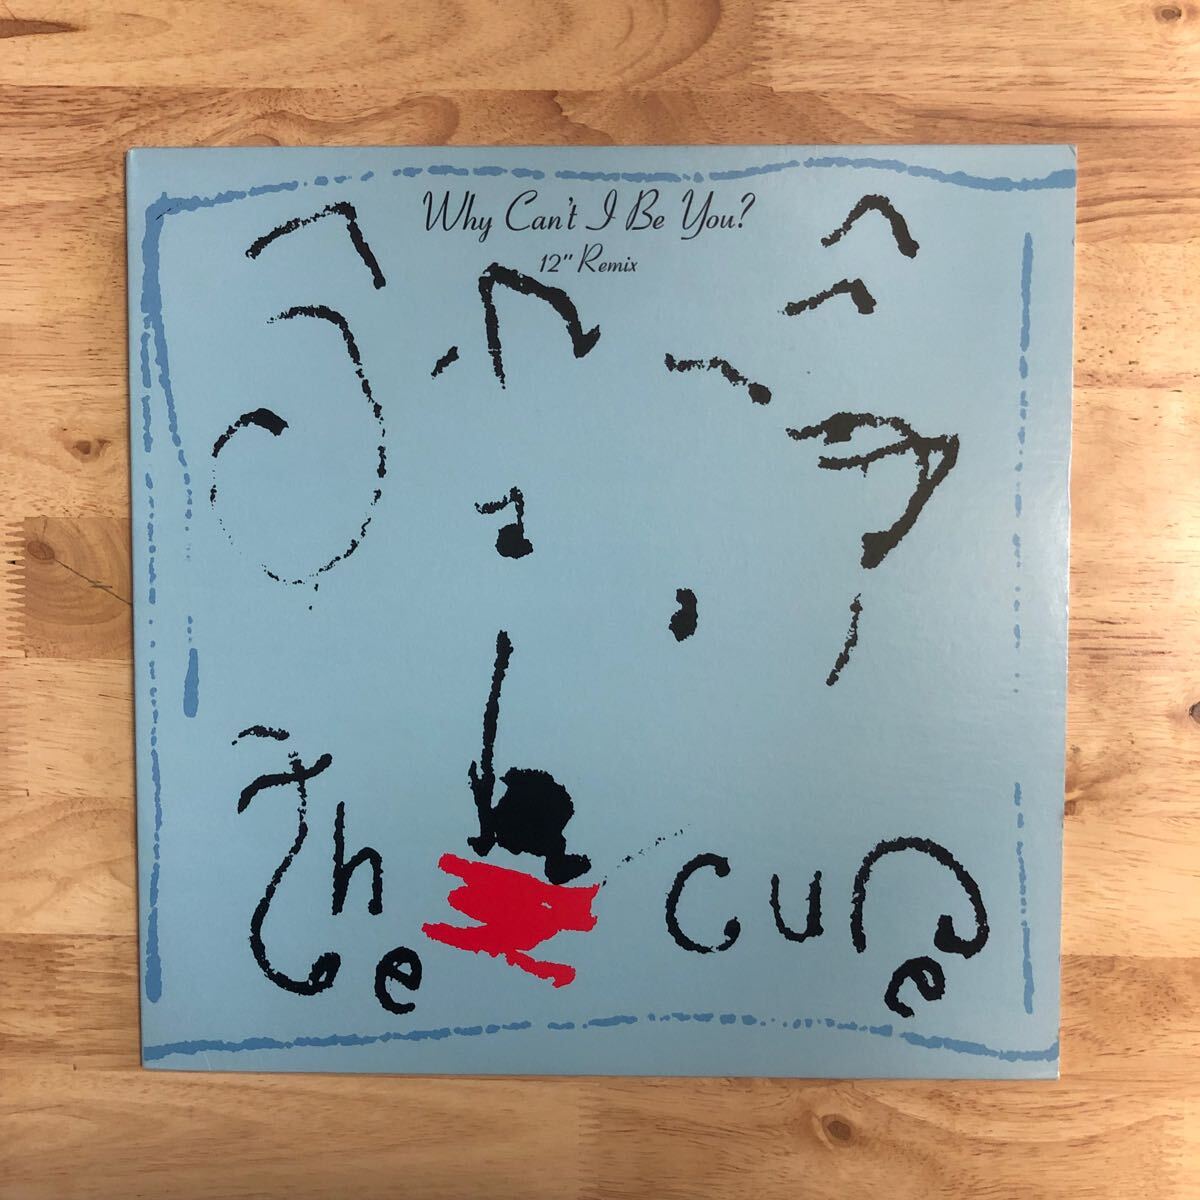 LP 帯付き含む3枚セット THE CURE WHY CAN'T I BE YOU? ホワイ・キャント・アイ・ビー・ユー? 国内盤/UKオリジナル/USオリジナル★キュアー_画像5